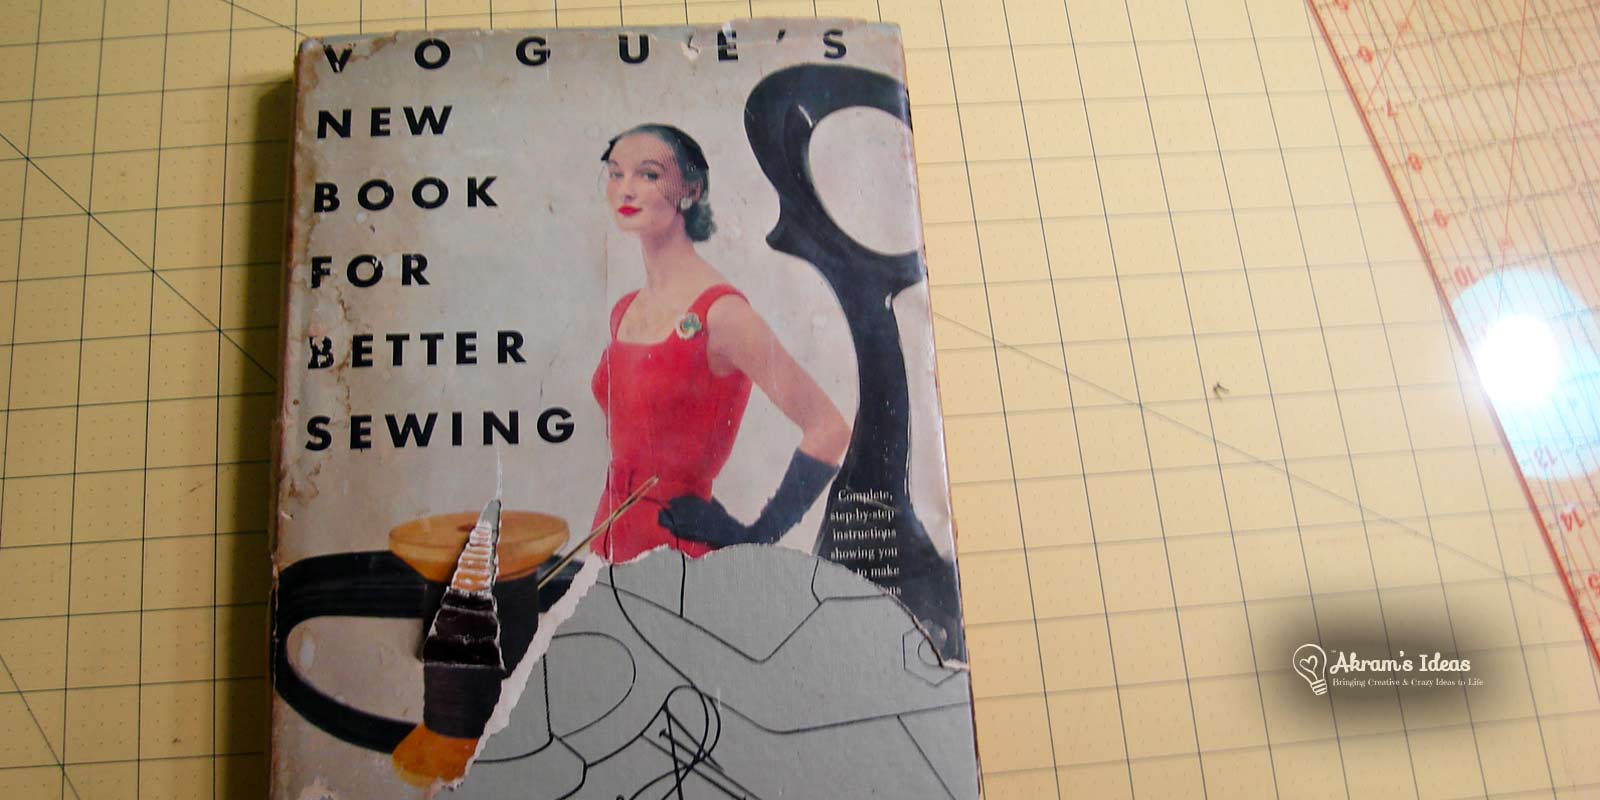 Akram's Ideas: Vogue's New Book for Better Sewing